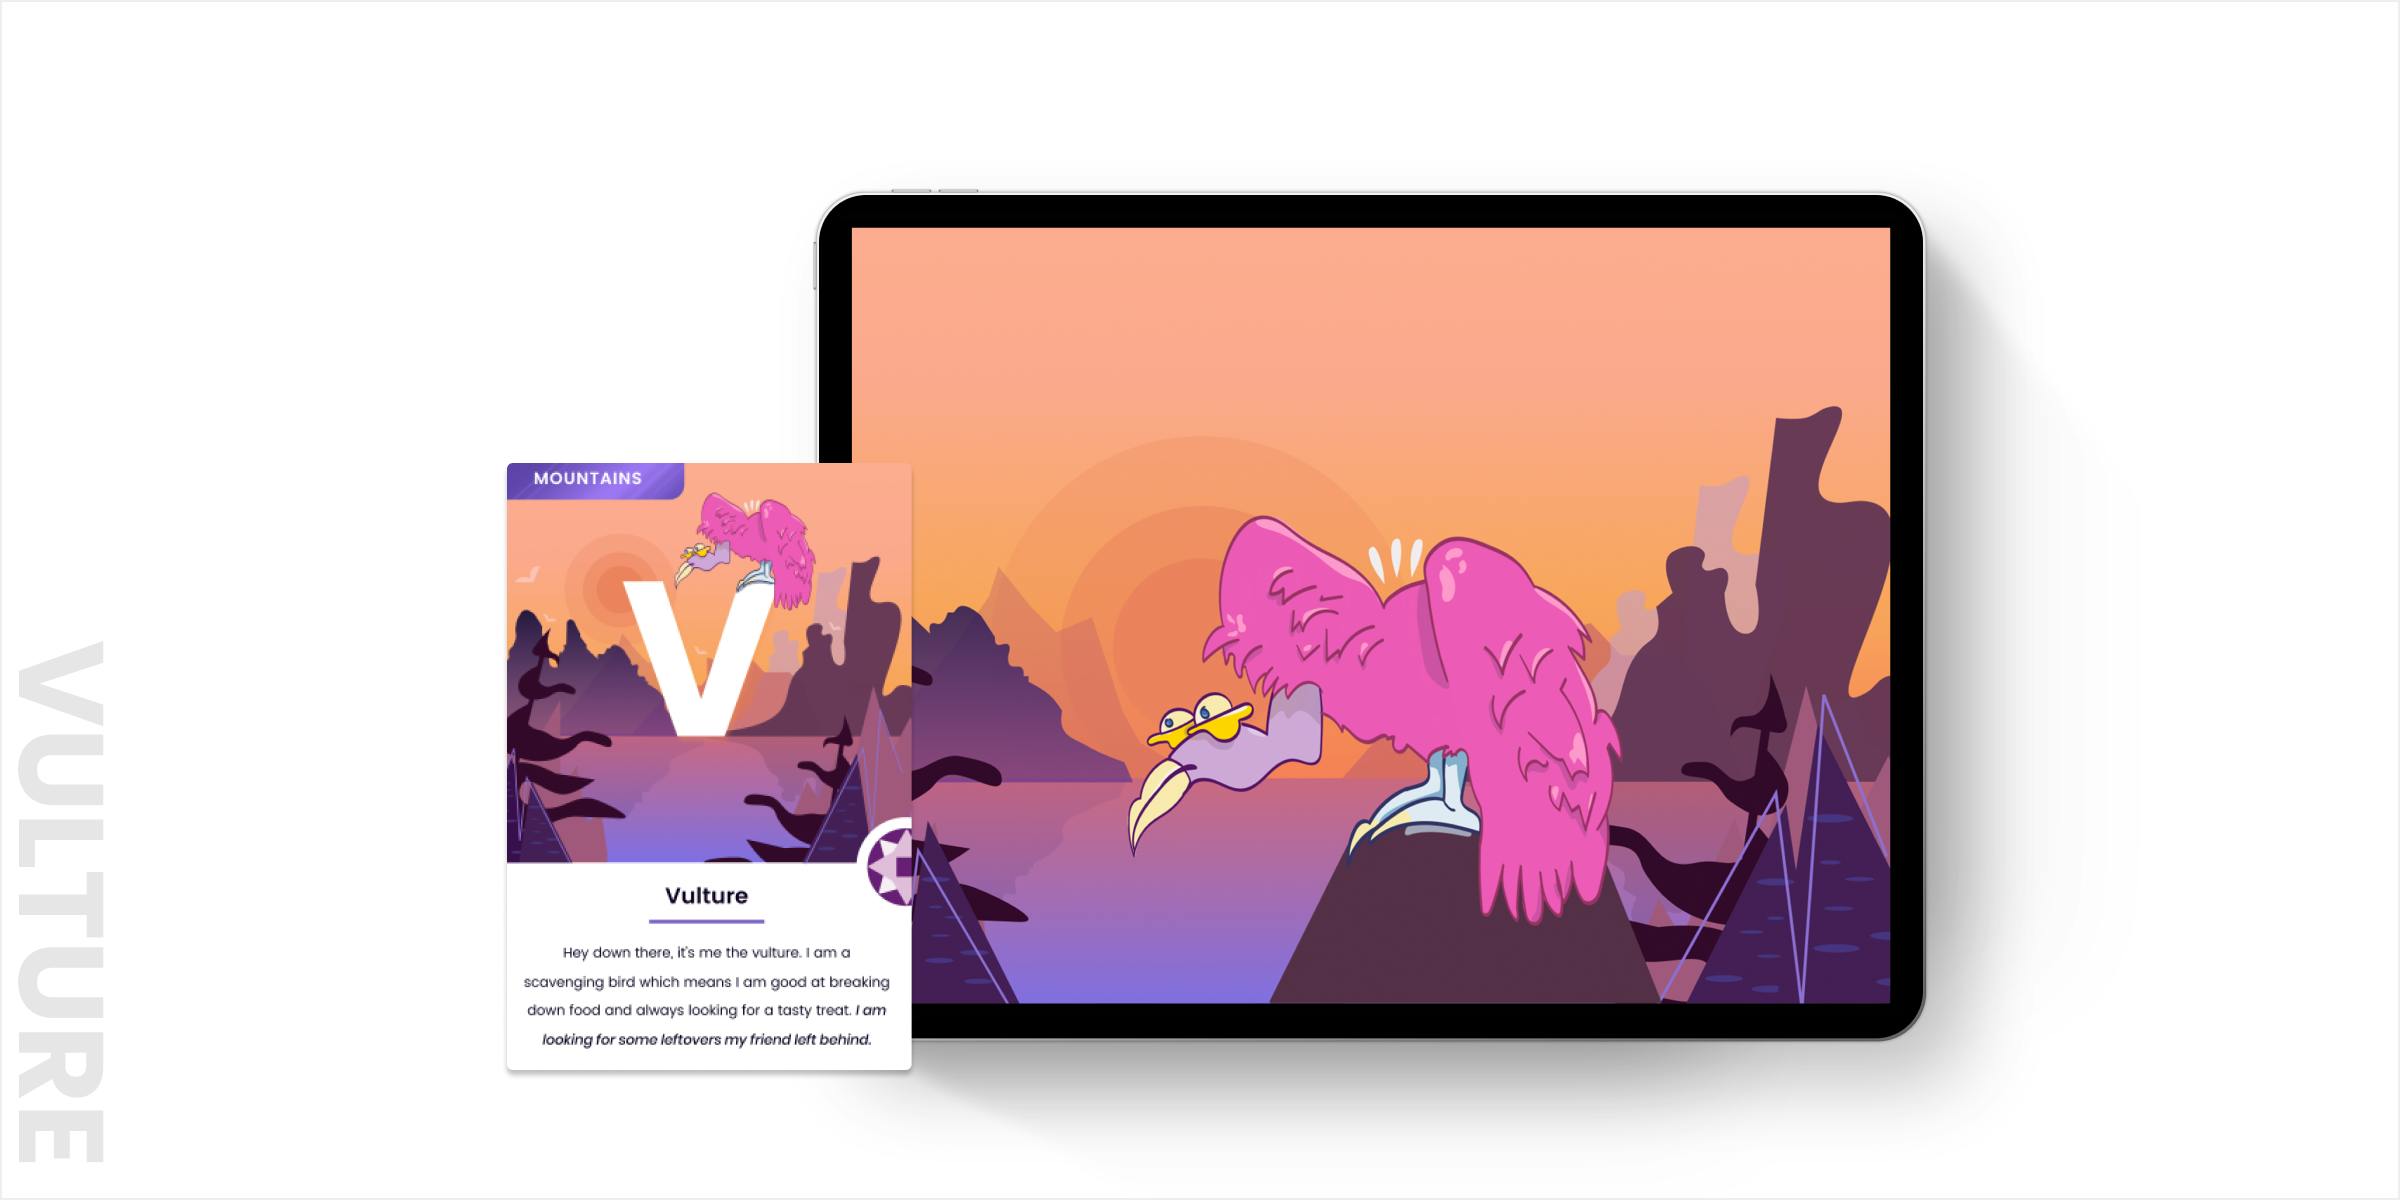 Mockup of vulture interaction in an iPad and printed card next to it. The vulture is sitting on top of a mountain behind a sunset looking for food.